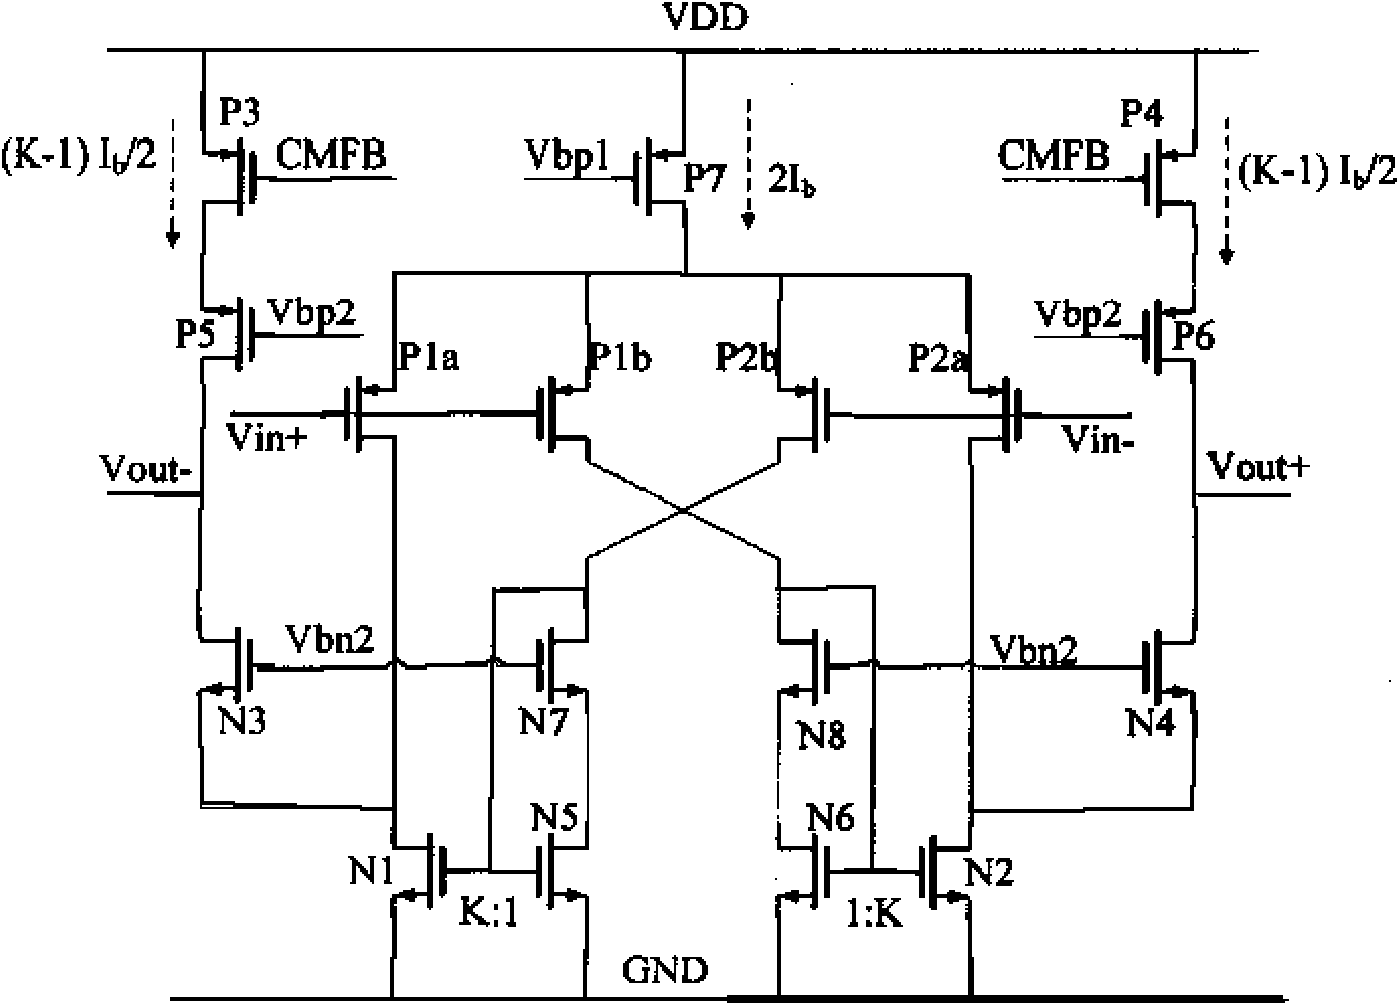 Transconductance-enhanced recovery current folded MOS (metal oxide semiconductor) transistor cascade amplifier